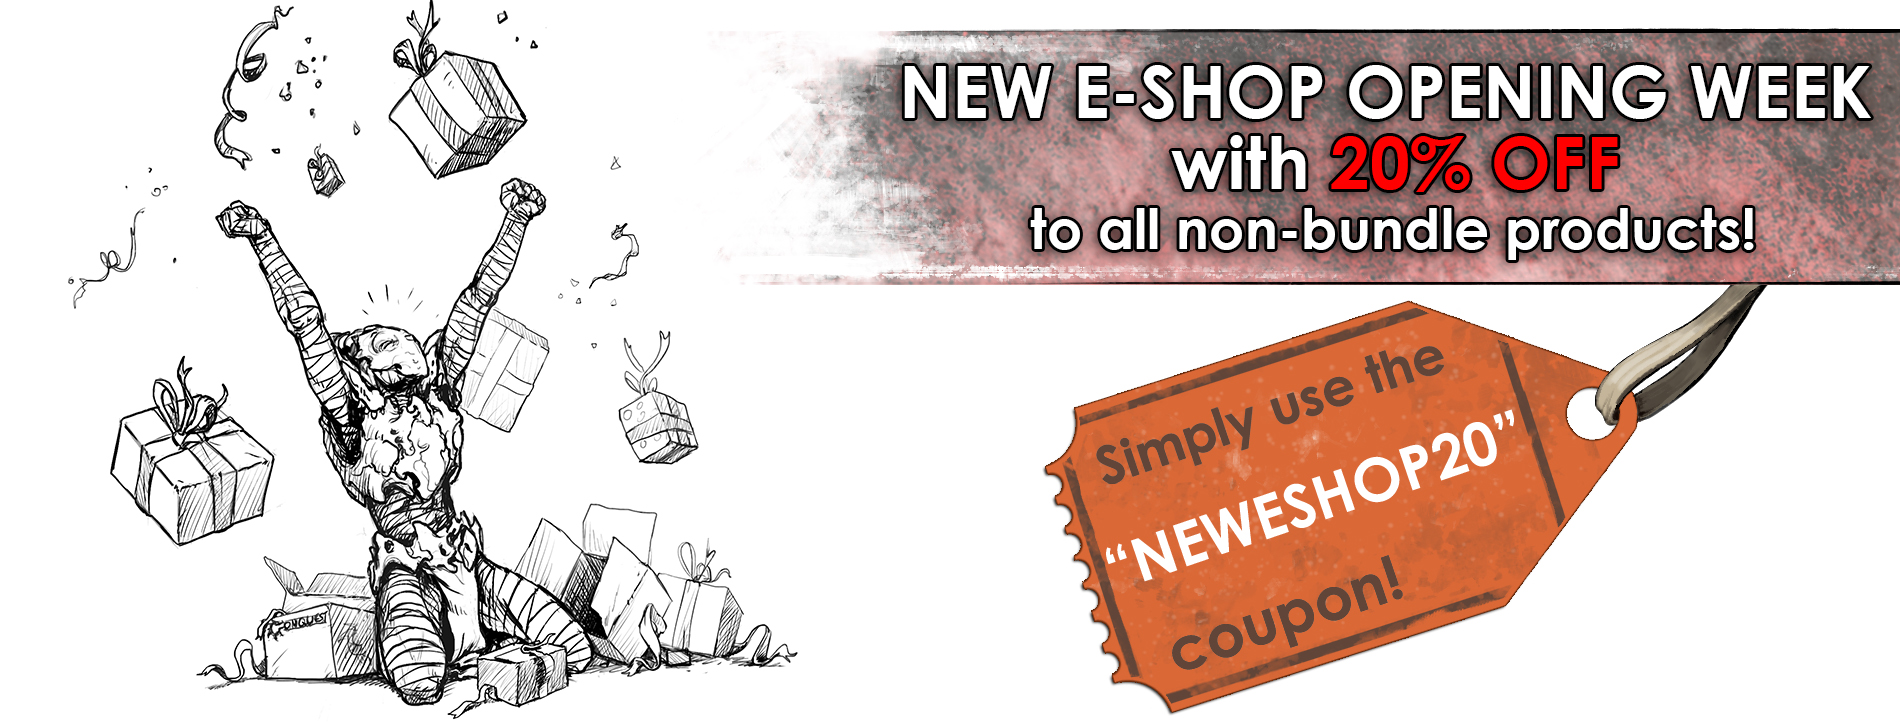 New Conquest E-Shop with 20% off!